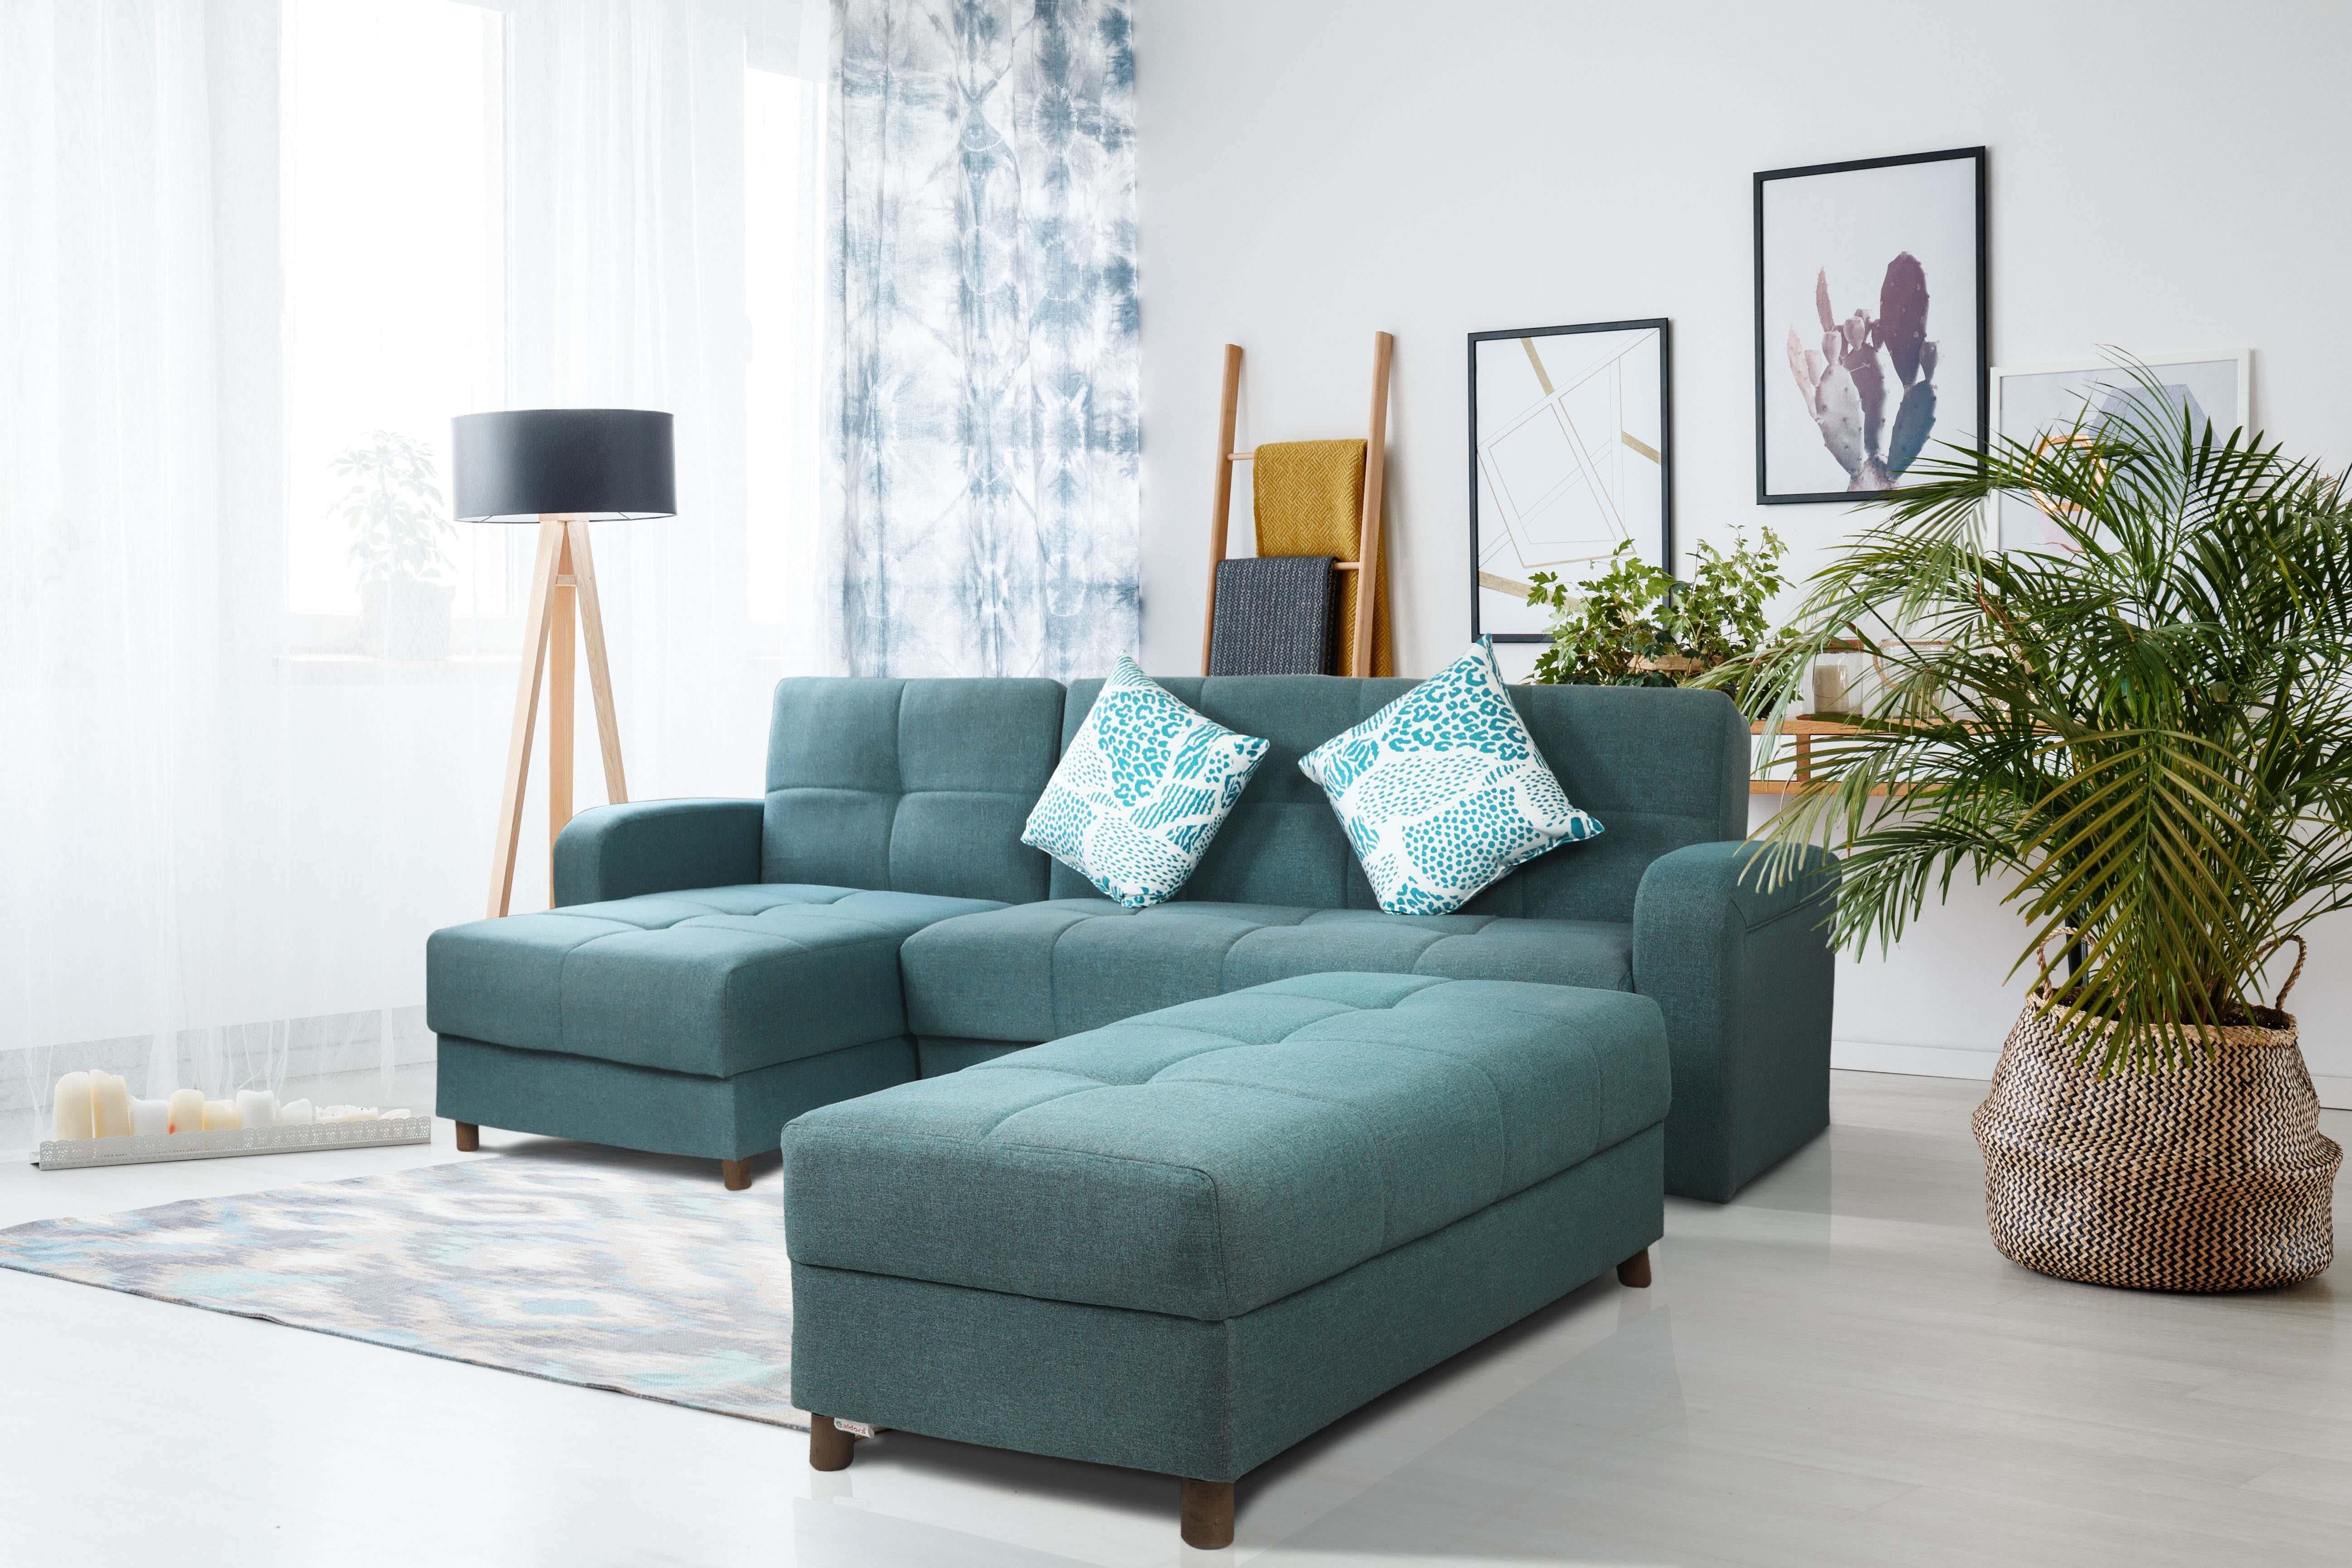 Get Aldora Rahway Multi-Use Linen Fabric And Wood L-Shaped Corner Sofa Bed, Sofa 2 Seats, Chaise Longue, Puff, 2 Cushion - Turquoise with best offers | Raneen.com